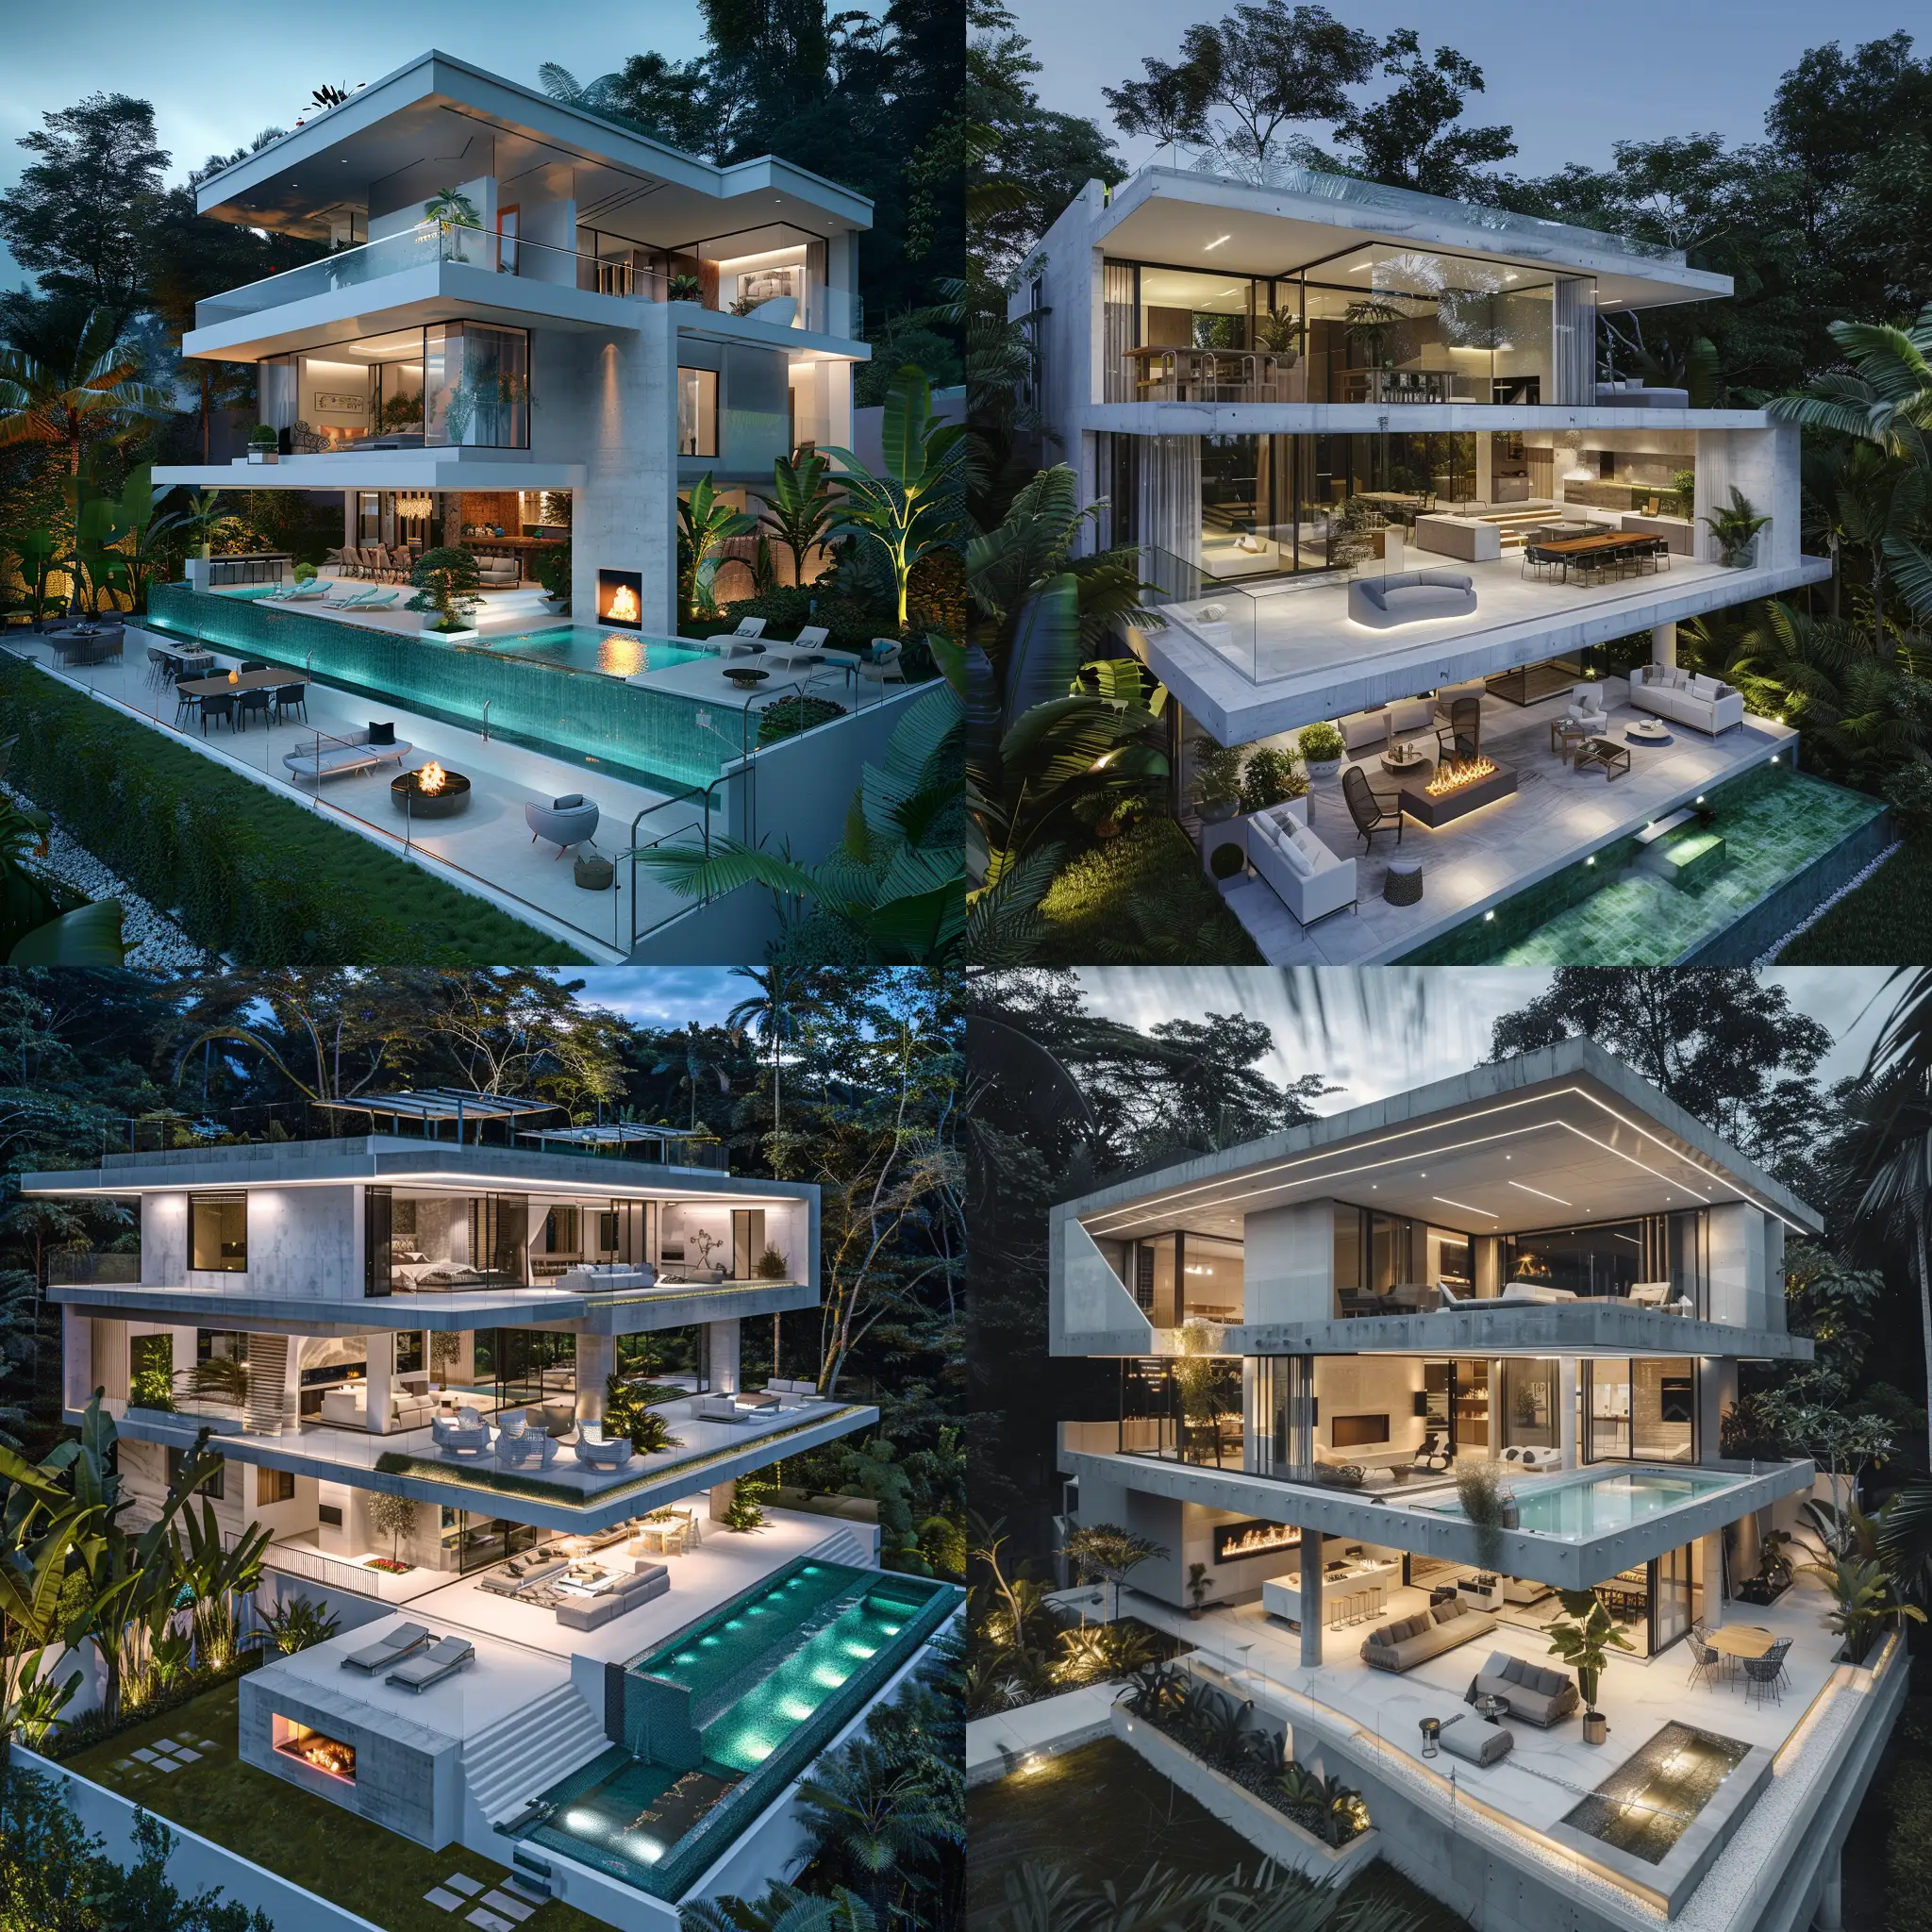 Modern three-story villa with white and gray colors and concrete with full furniture arrangement.
It has an infinity glass pool, decorated and soft lighting, fireplace and table and chairs, landscaped yard, fenced lawn,
In a lush tropical forest with broad leaves and the sea, at night, real photo.
